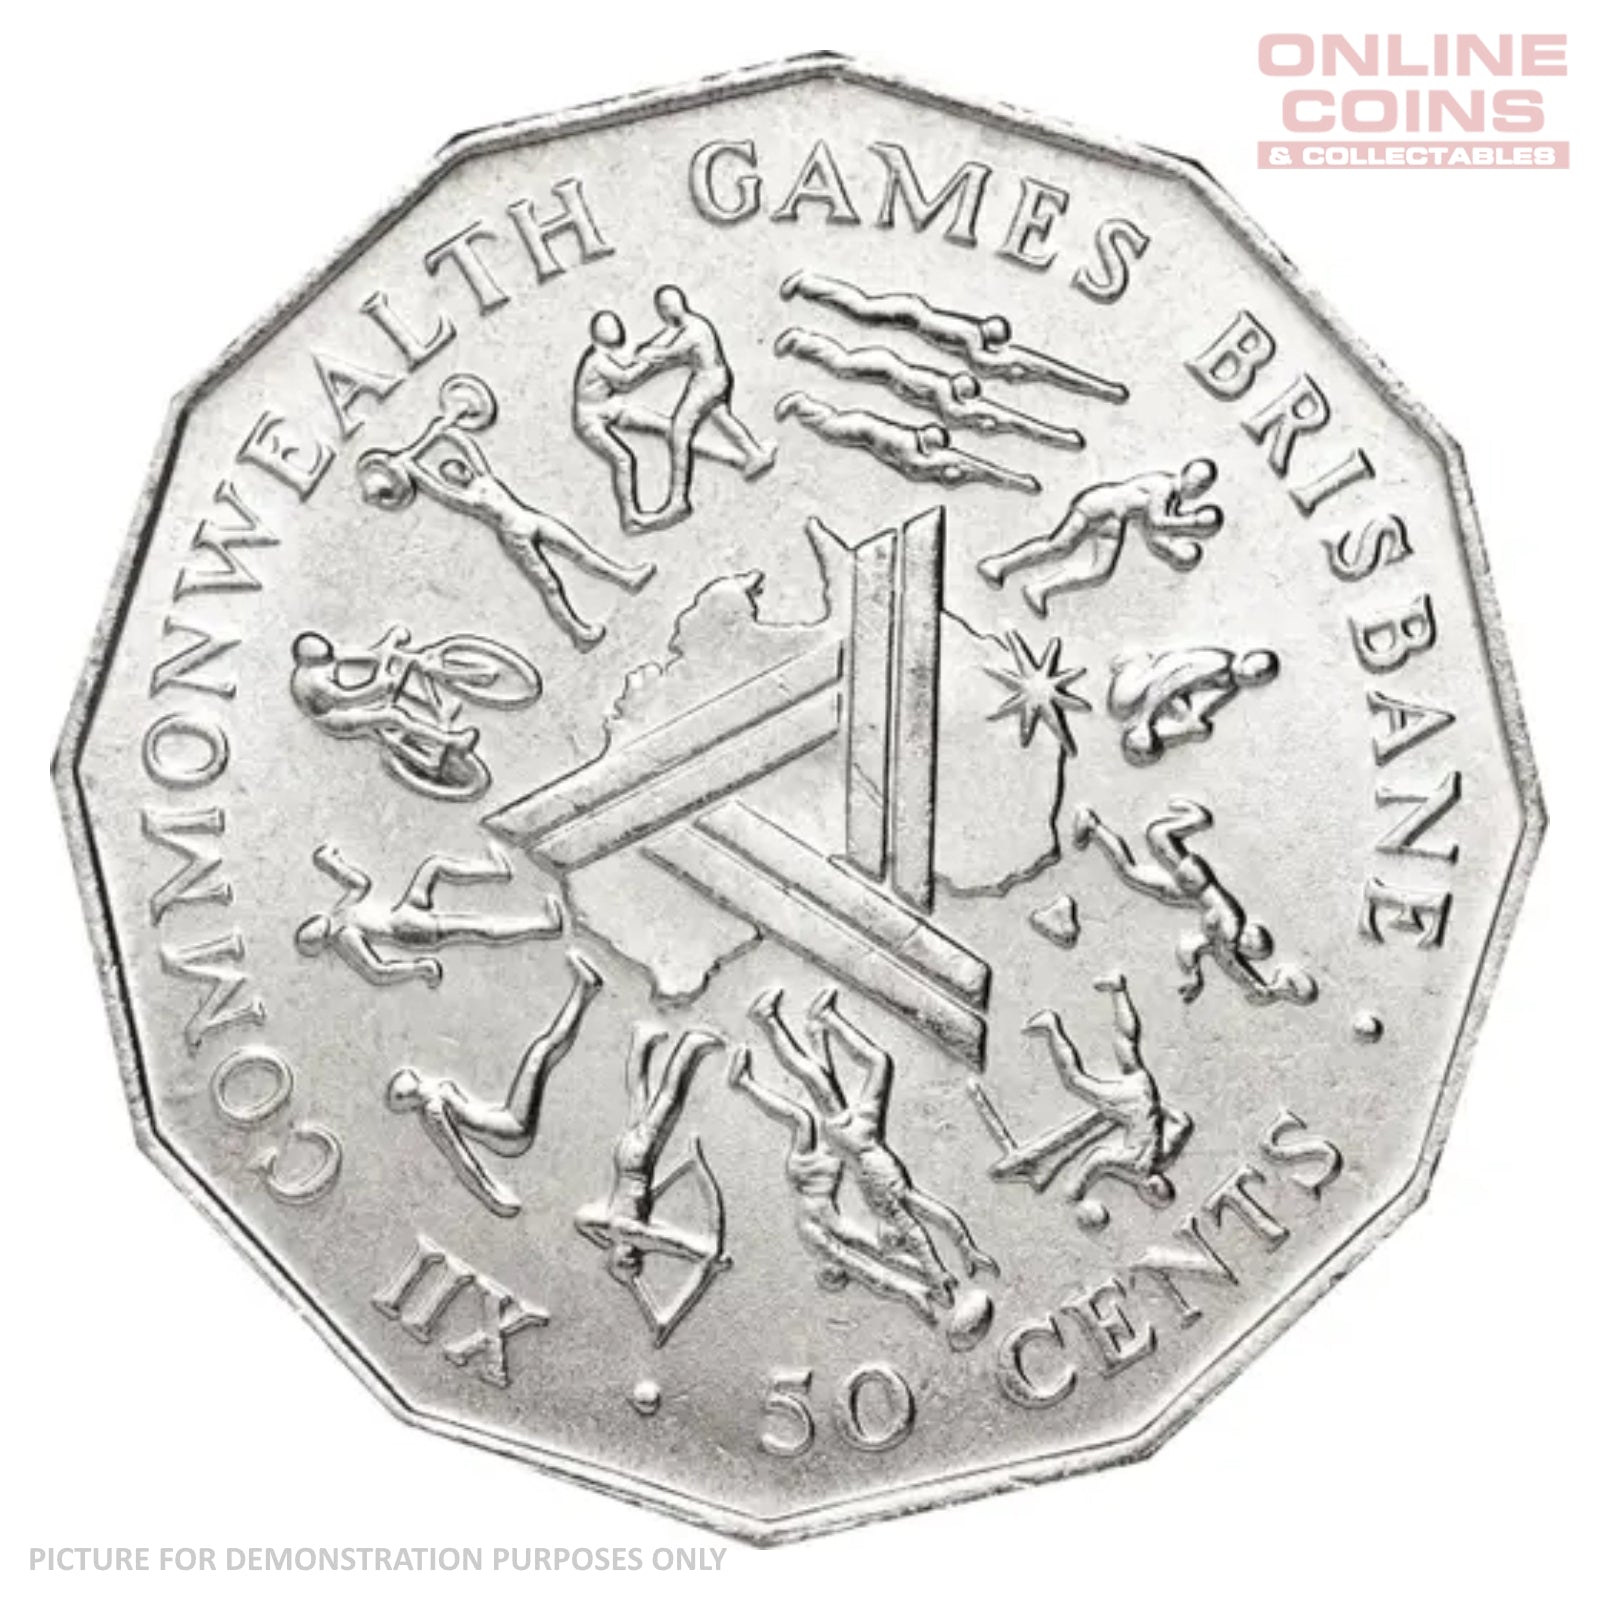 1982 Circulated 50c Loose Coin - Commonwealth Games